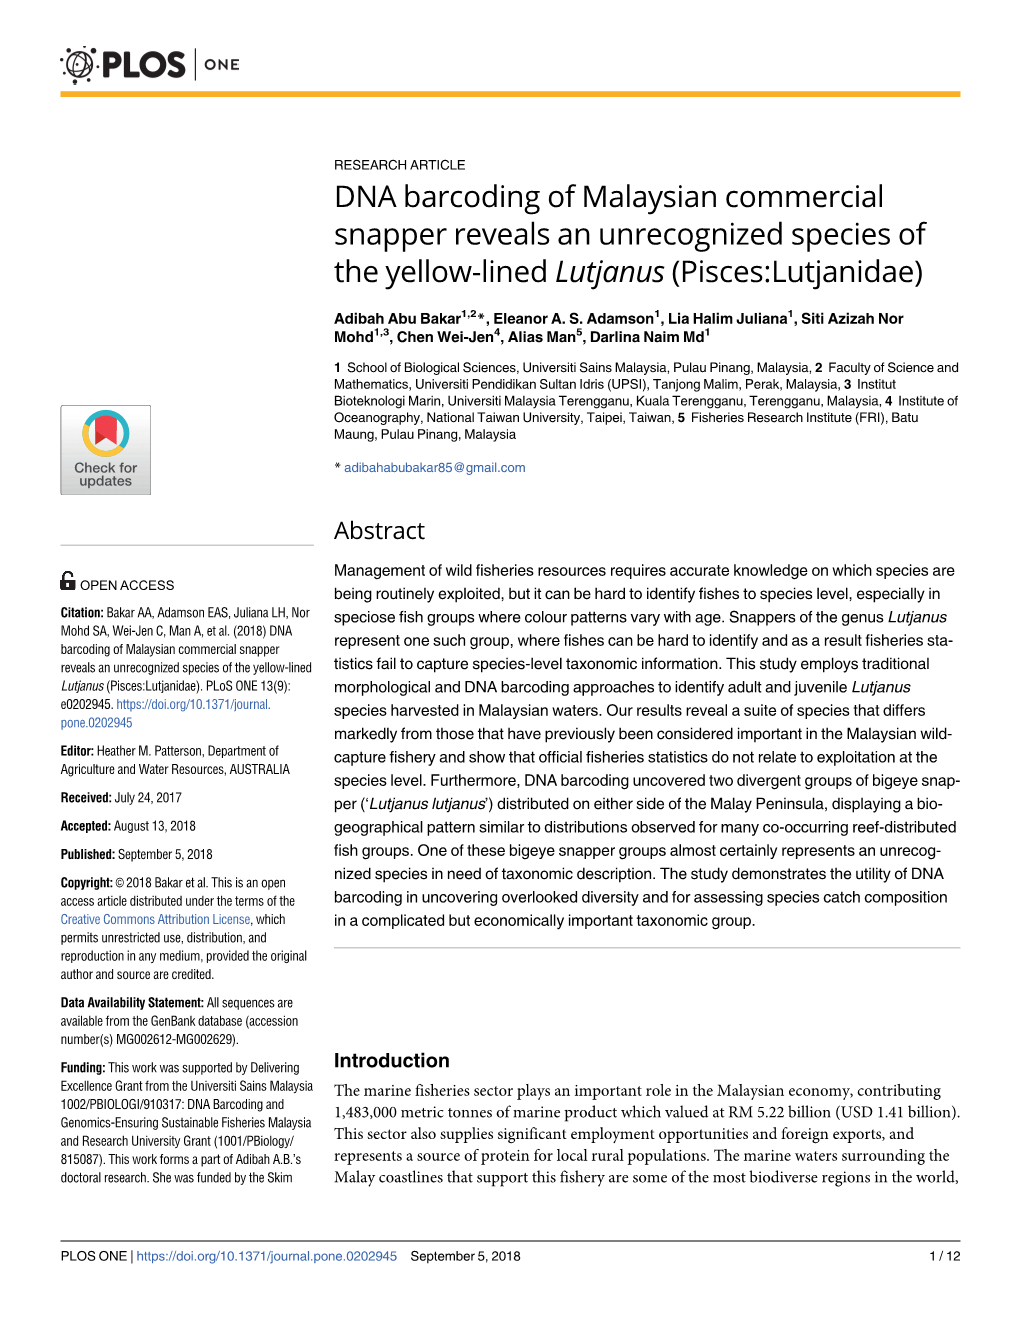 DNA Barcoding of Malaysian Commercial Snapper Reveals an Unrecognized Species of the Yellow-Lined Lutjanus (Pisces:Lutjanidae)